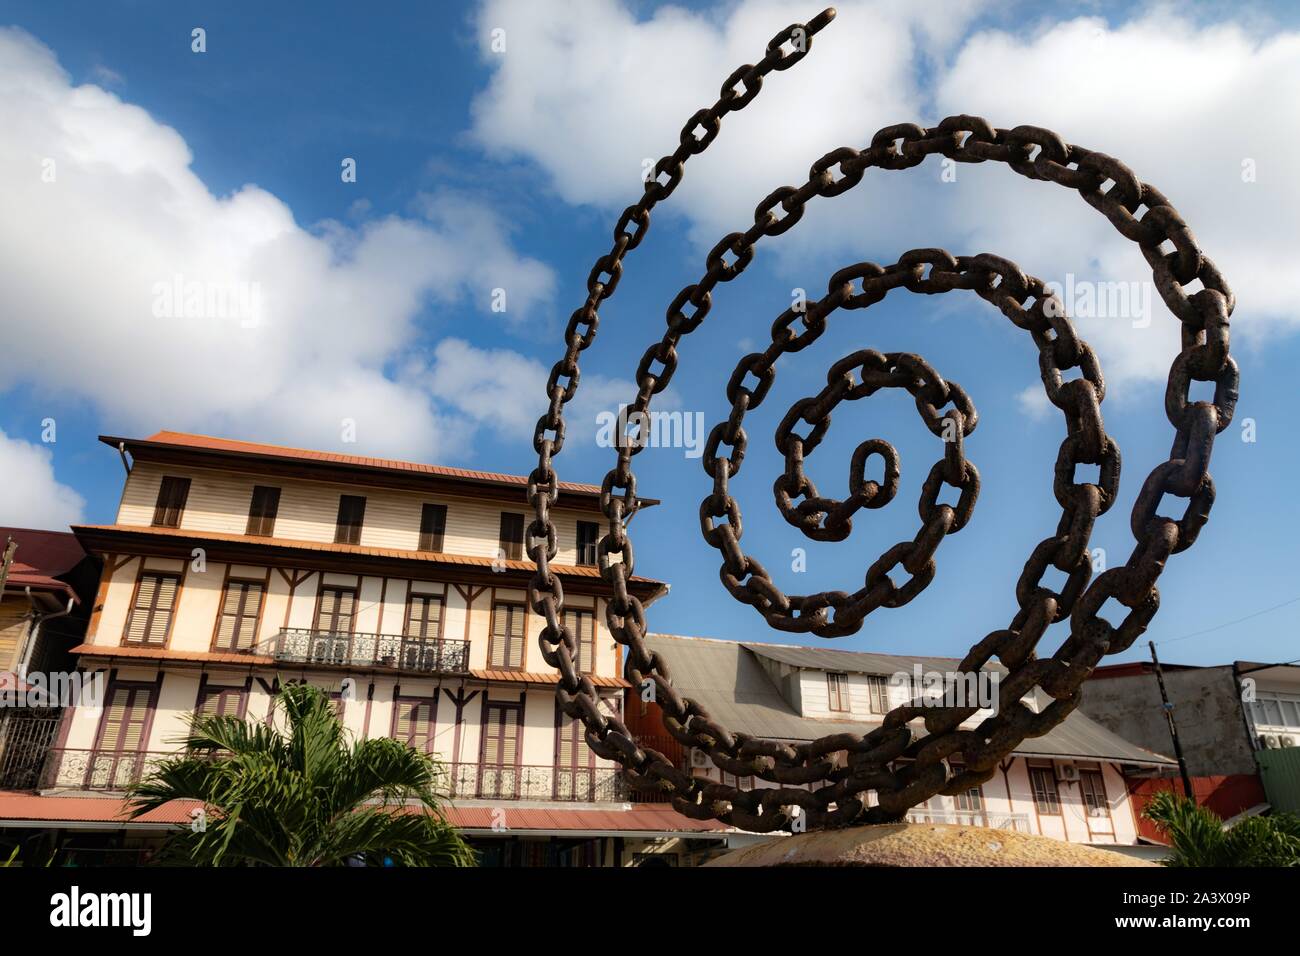 THE CIRCLE OF SLAVES, A WORK BY GUY BENTH CAYENNE IN MEMORY OF THE VICTIMS OF SLAVERY AND THE SLAVE TRADE, CAYENNE, FRENCH GUIANA, OVERSEAS DEPARTMENT, SOUTH AMERICA, FRANCE Stock Photo